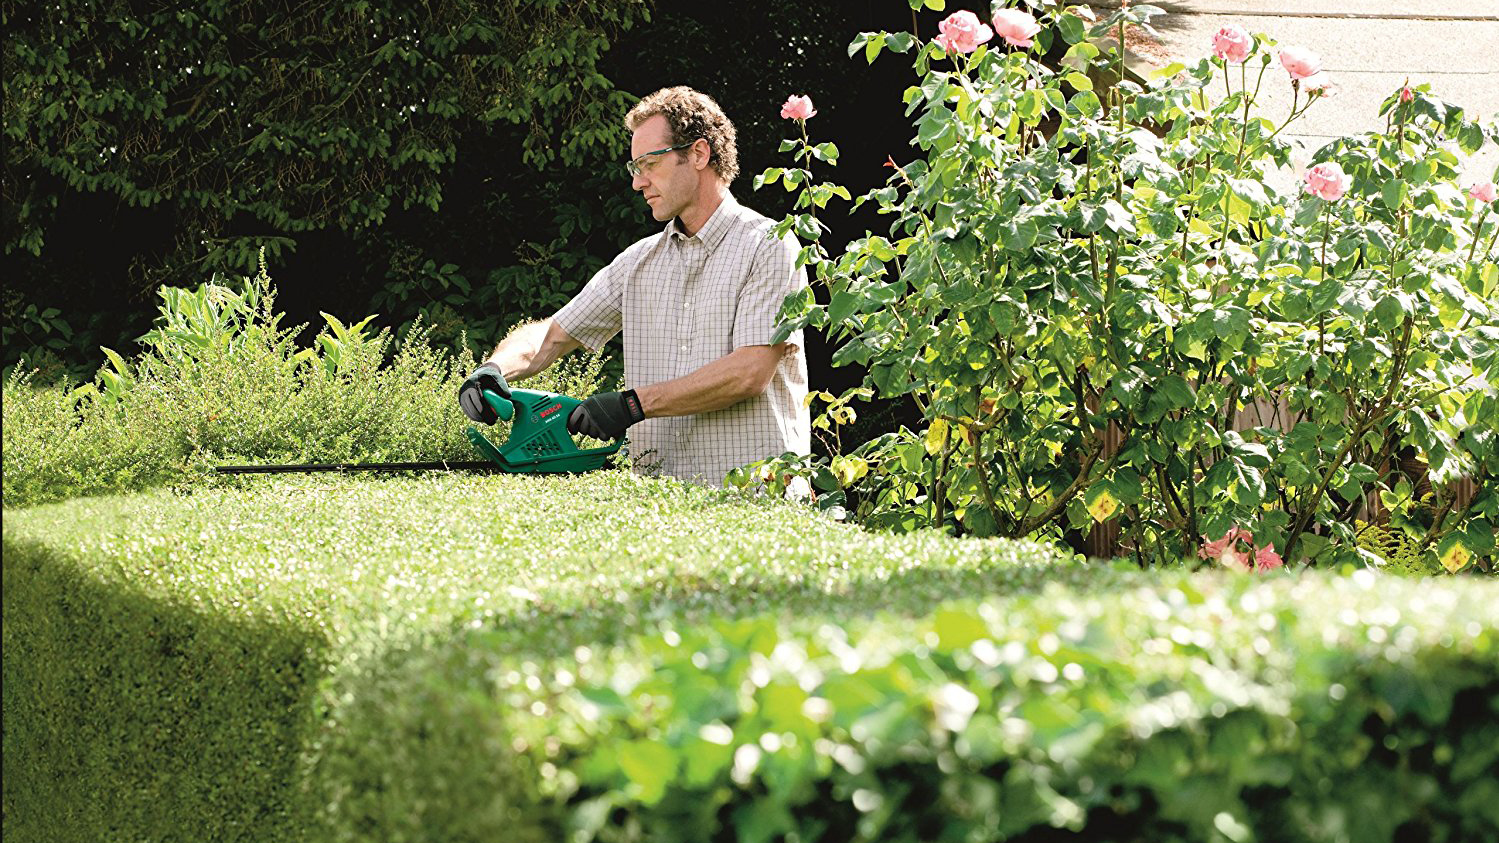 best heavy duty hedge trimmer